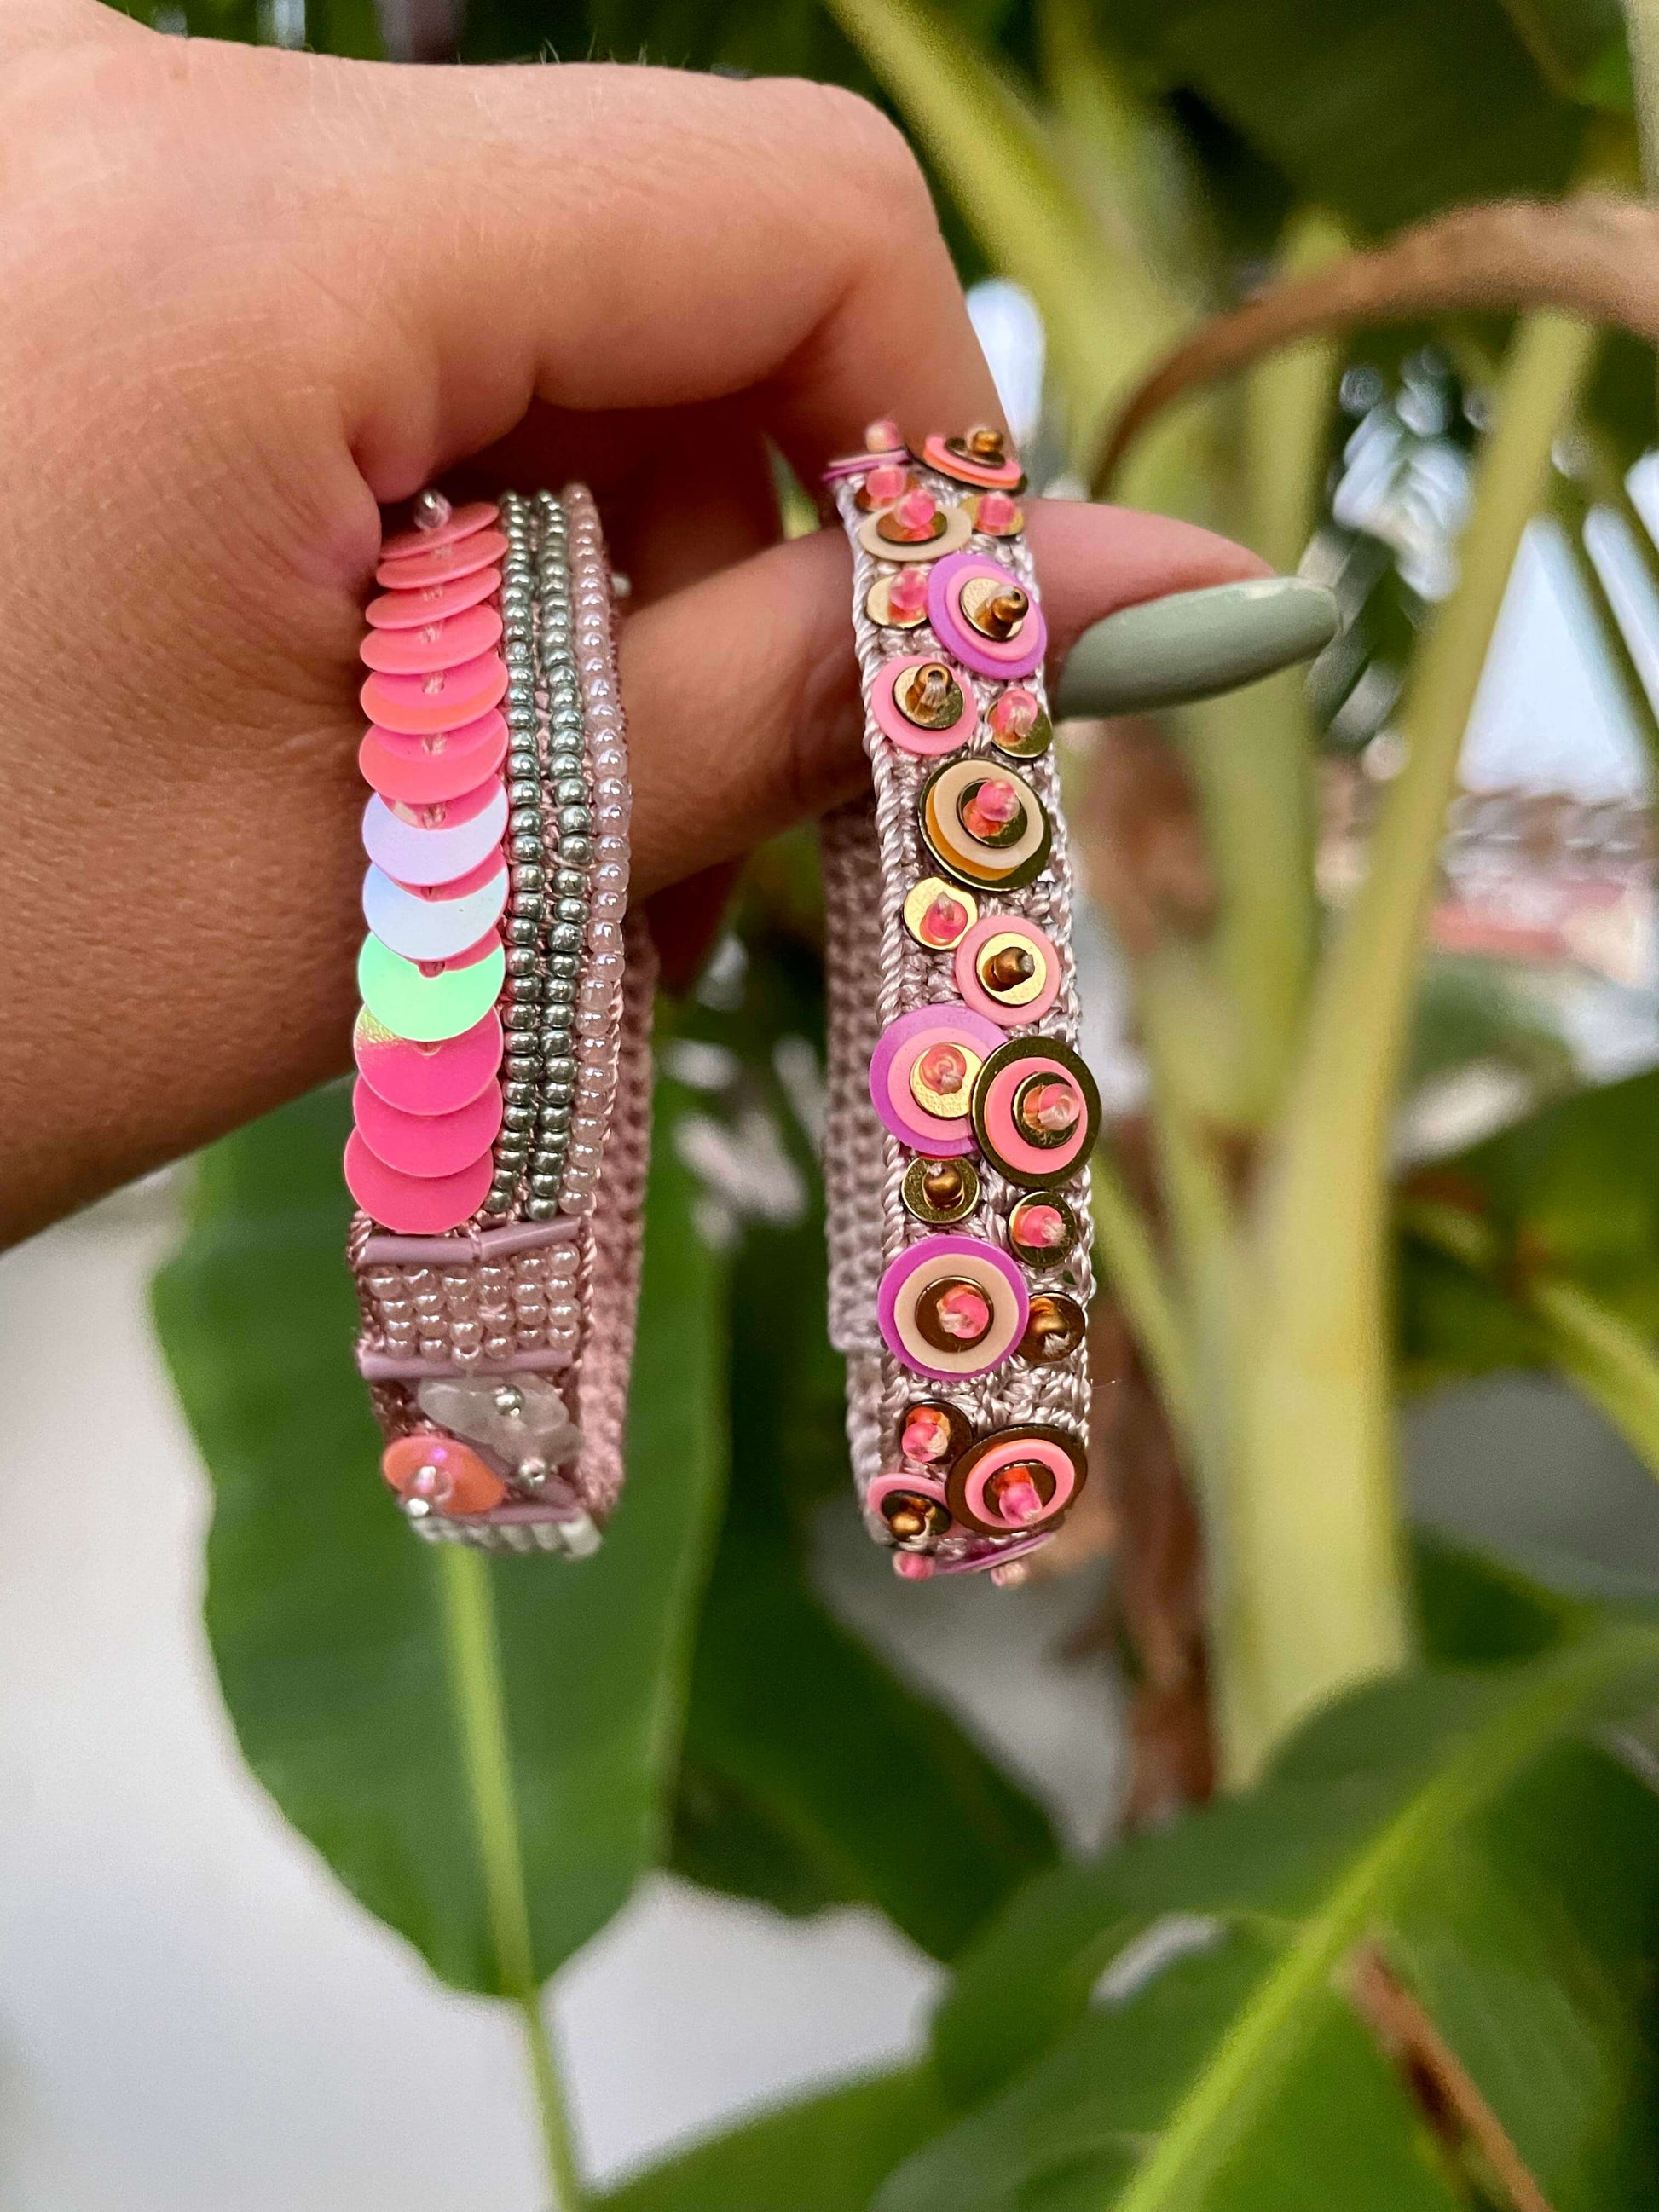 Handmade Bead and Sequin Embroidery Bracelets by Seyyah in Blush